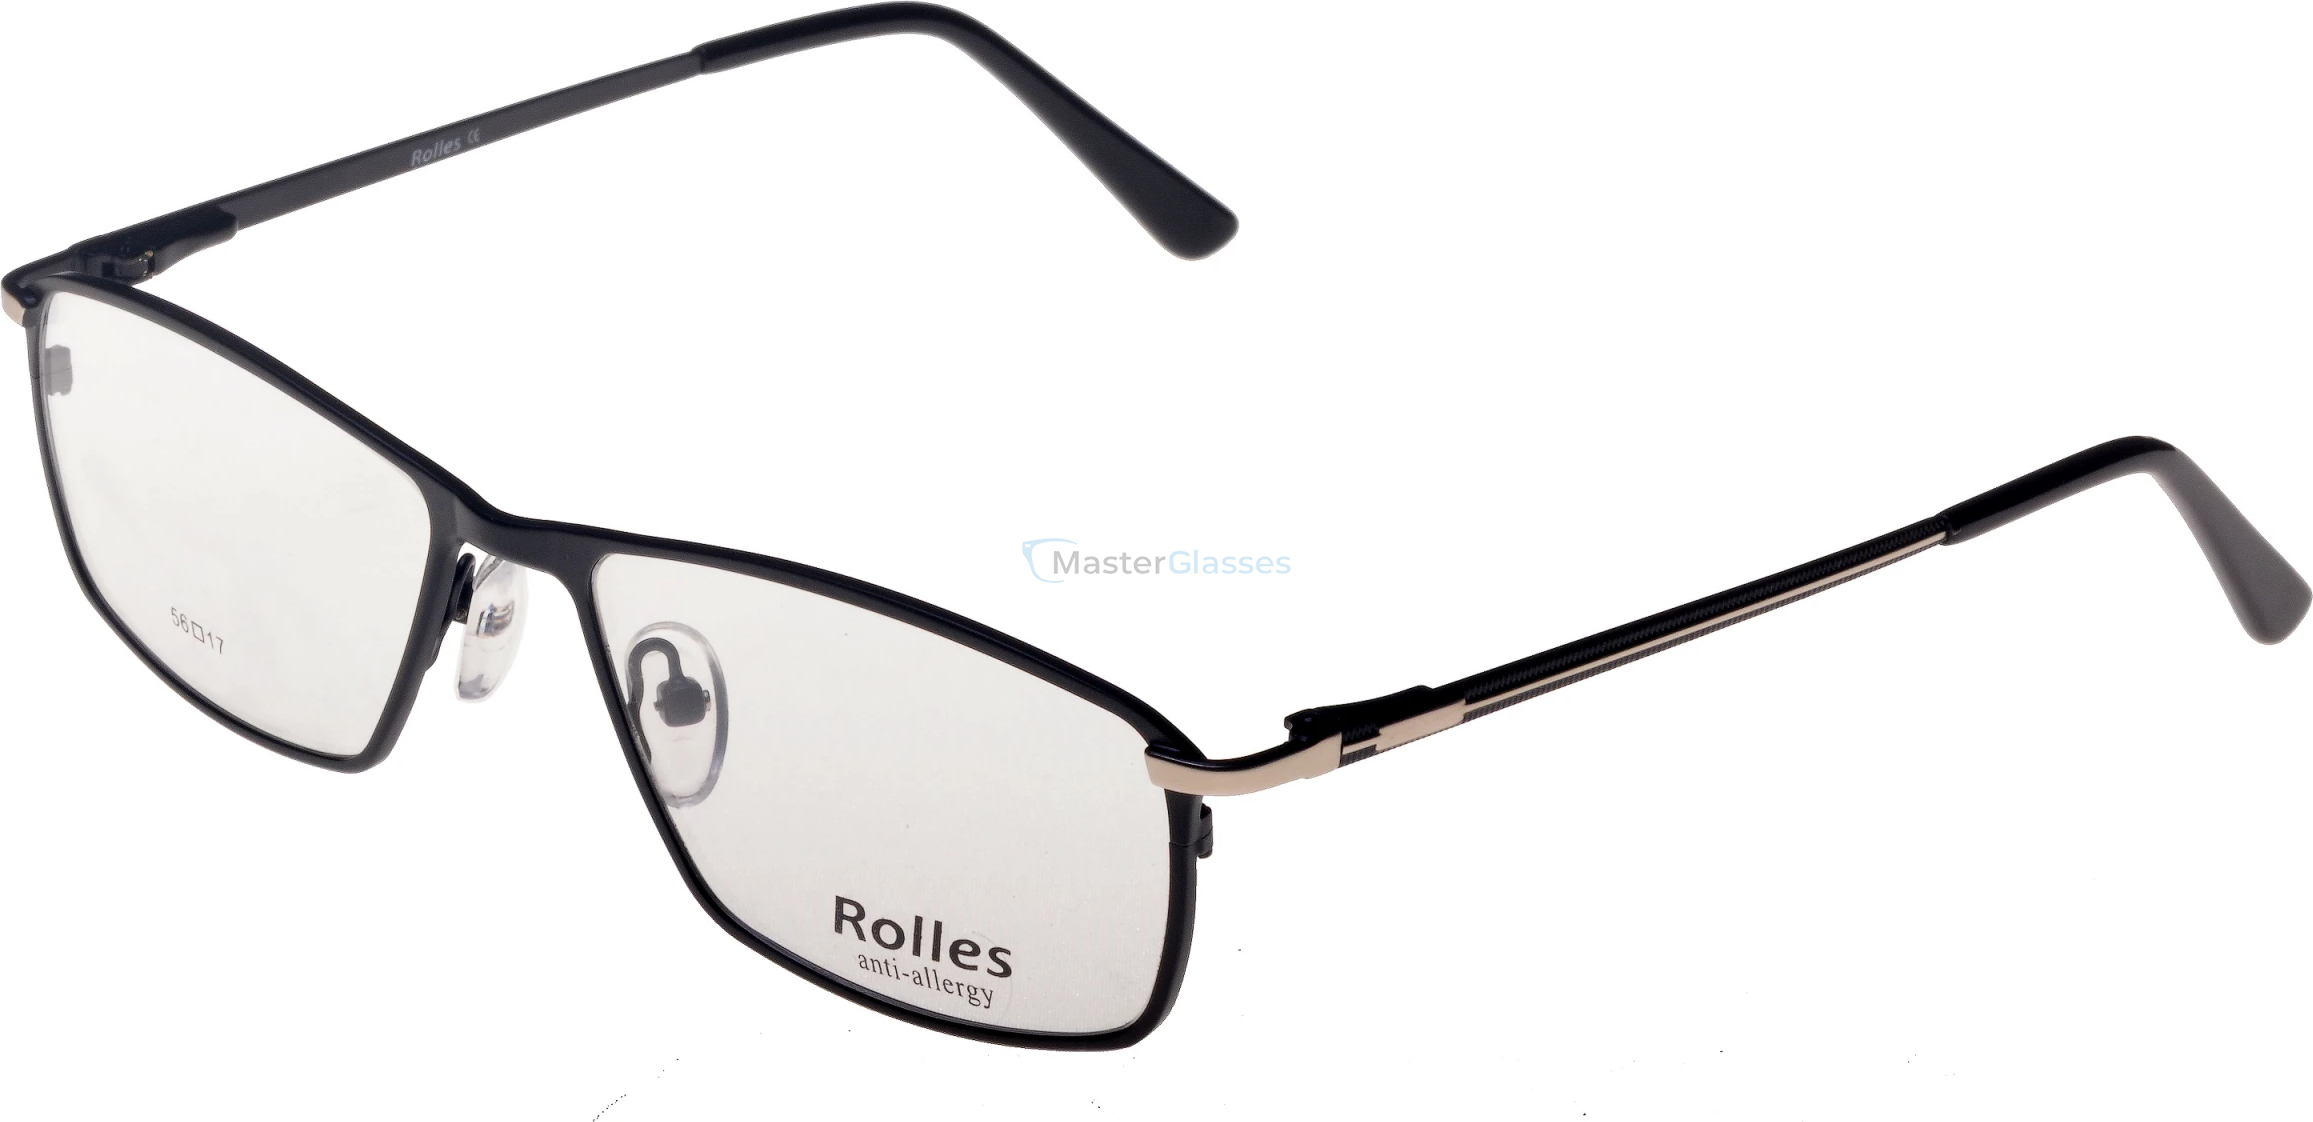  Rolles 581 03